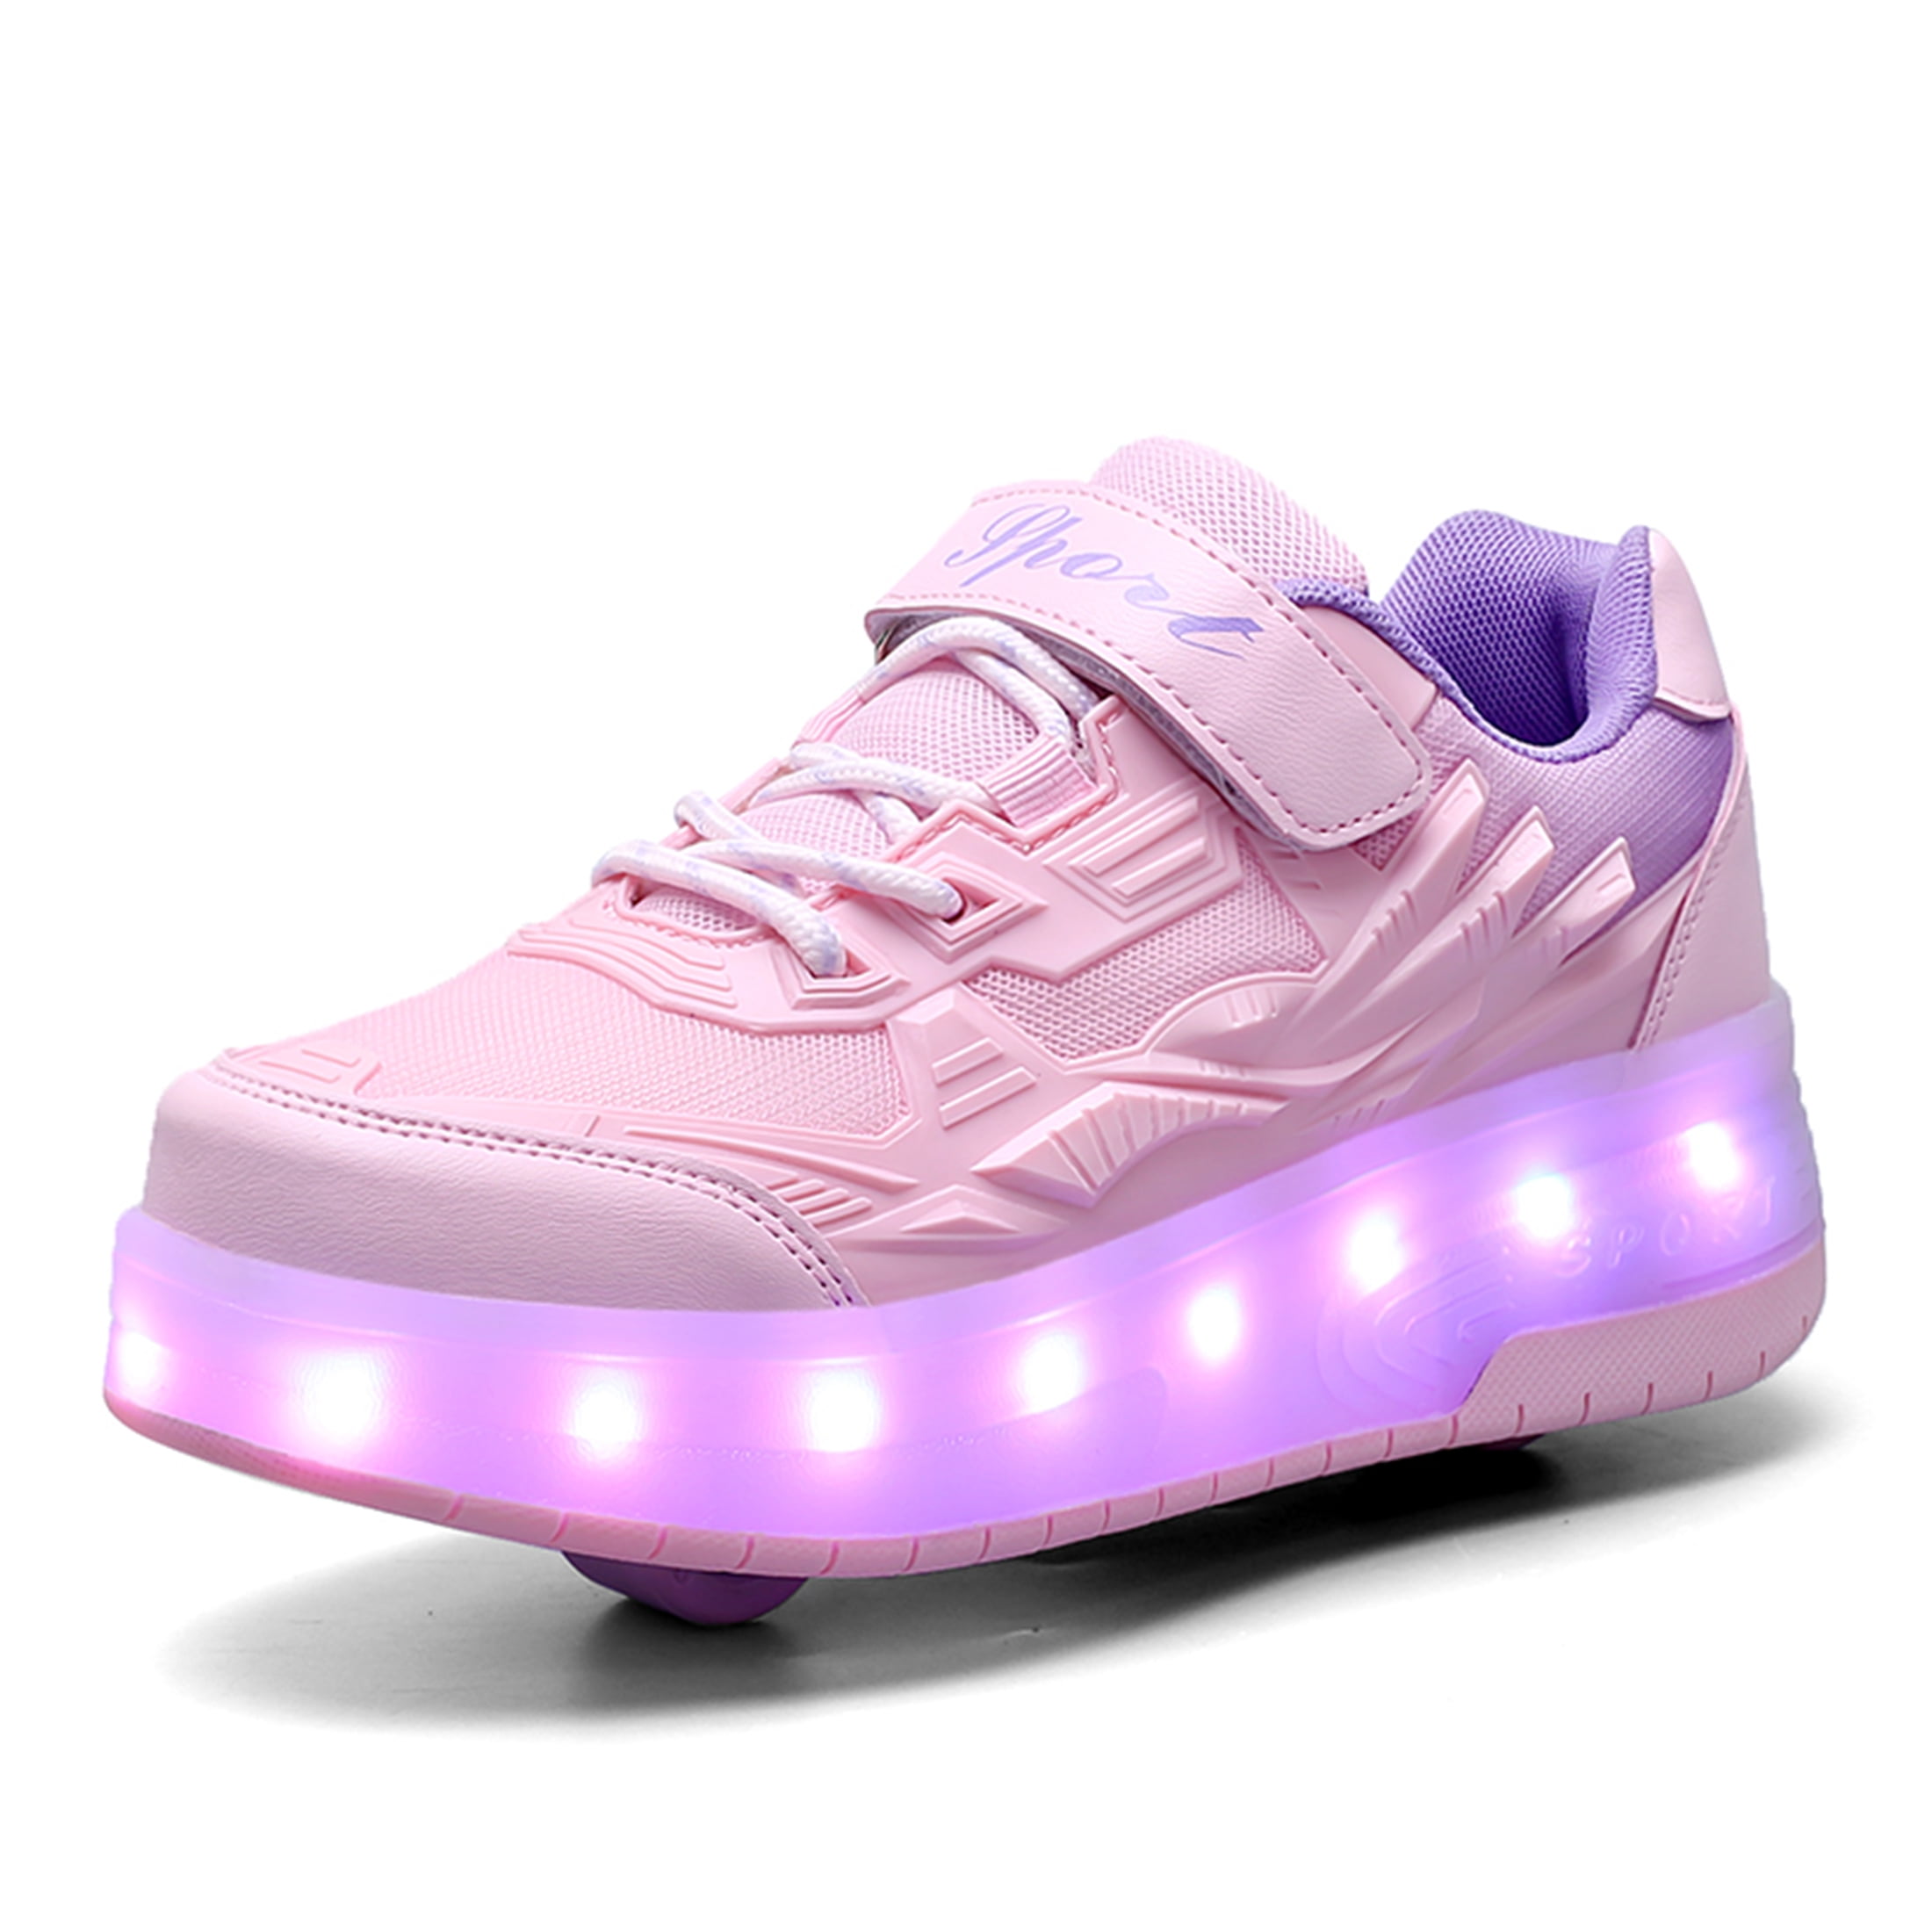 Kid Skate Sneakers Mode Light Up Clignotant Charge Roller Skate Skate  Skateboard Chaussures Filles Garçons Casual Sports Chaussures Double Roues